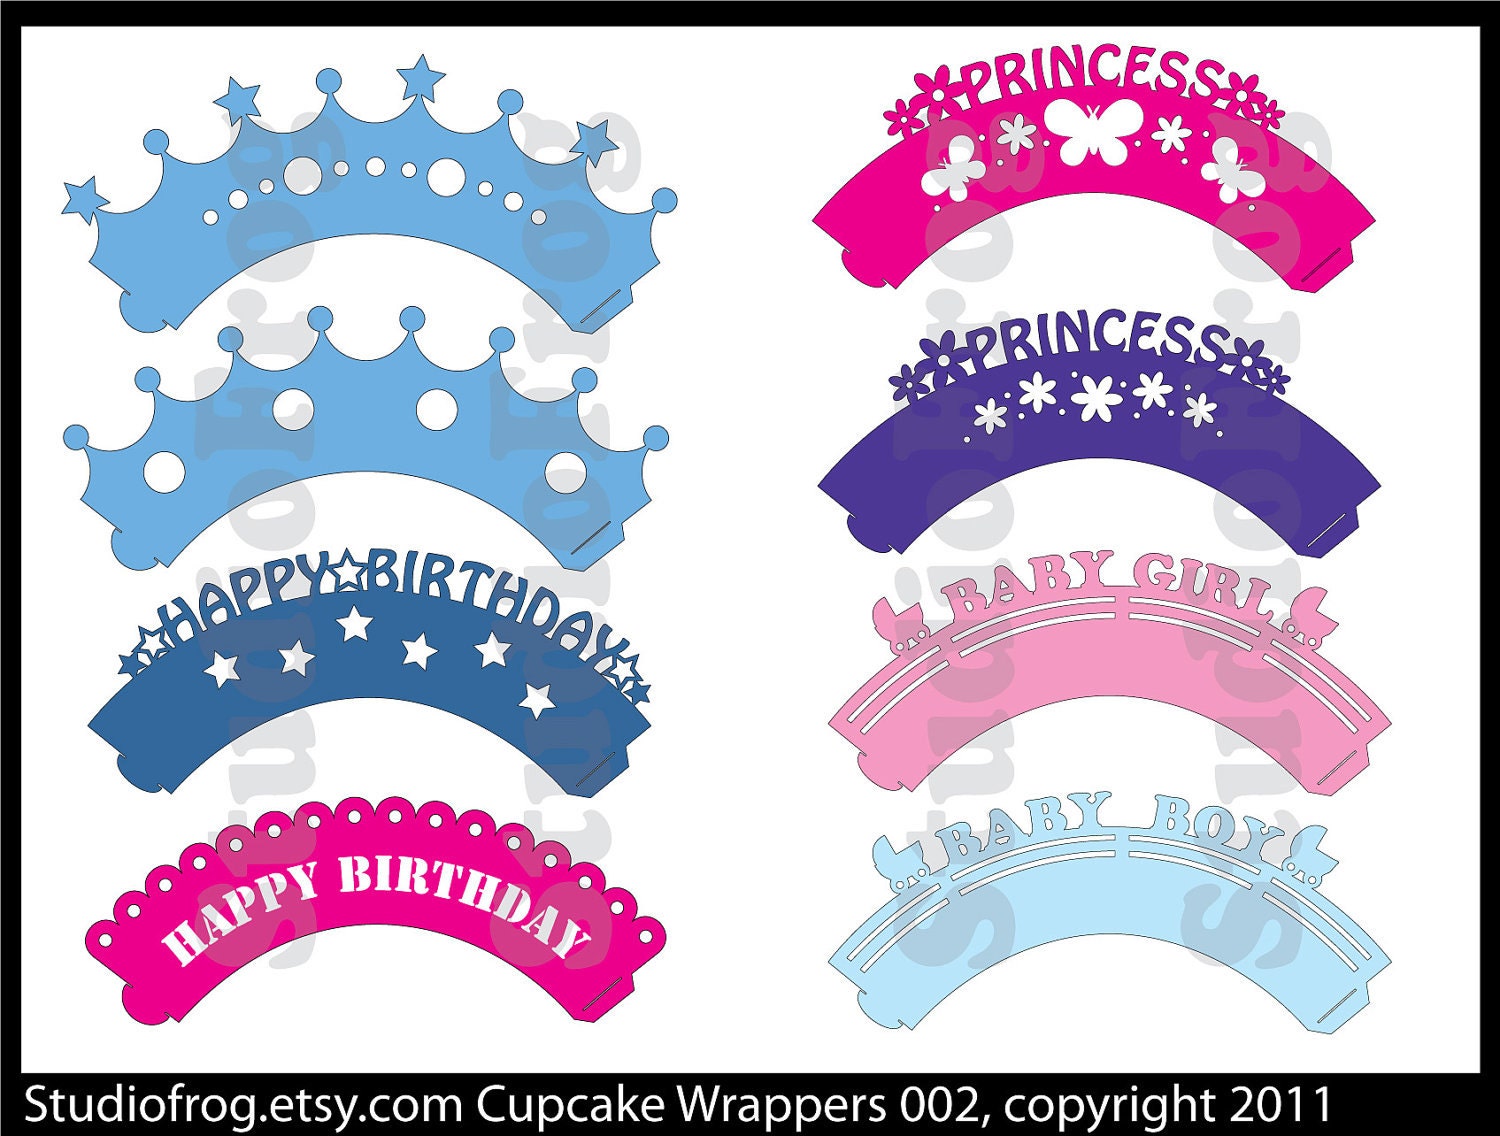 Download Cupcake Wrappers SVG Bundle 002 Updated